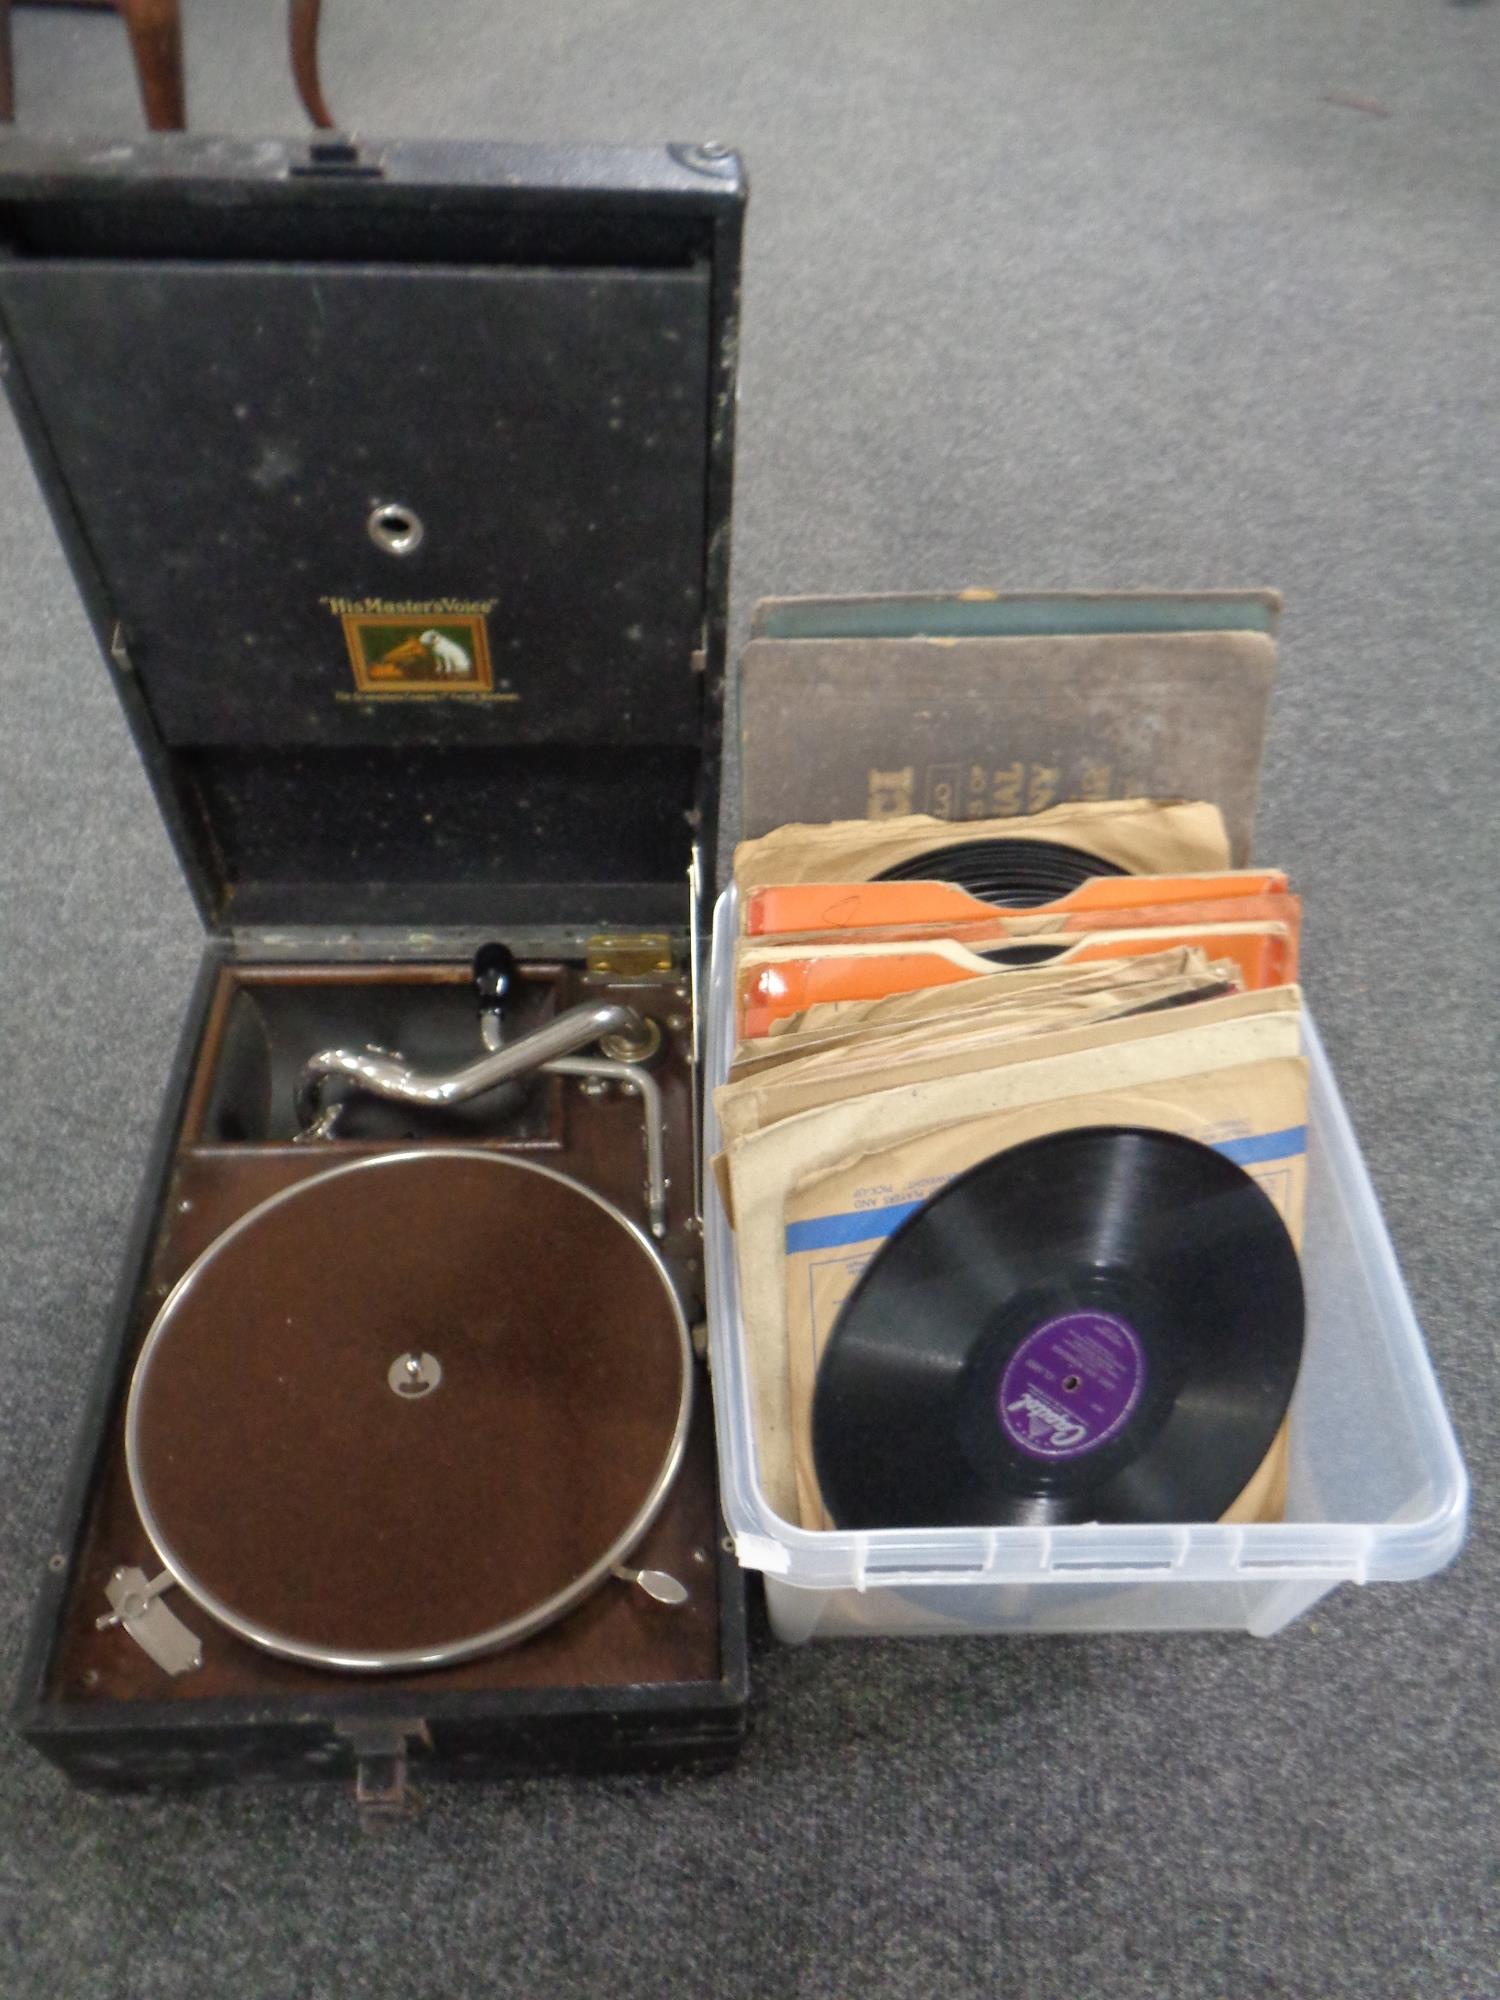 A 1930's HMV portable gramophone together with a box containing 78's